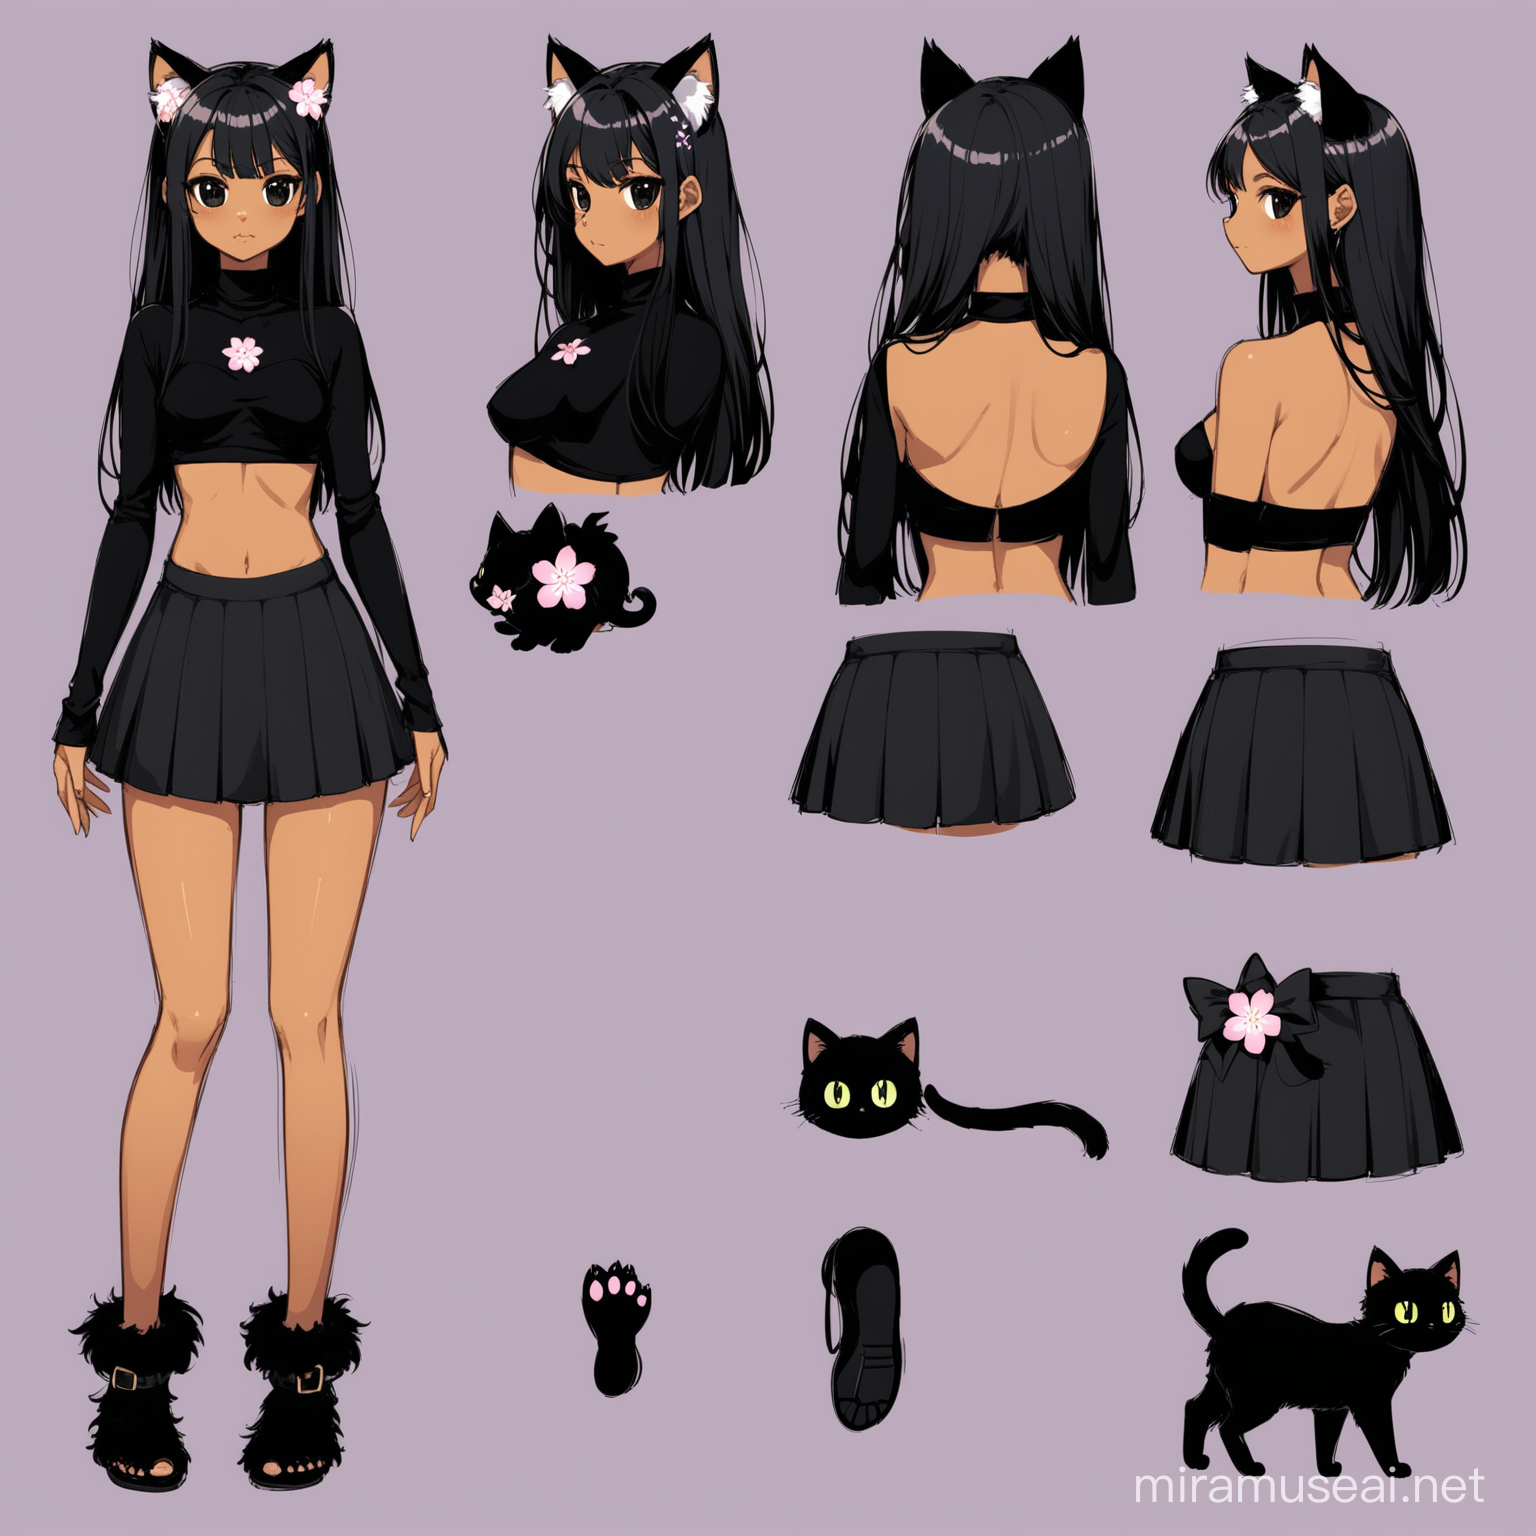 Spirit Blossom Style VTuber Character Reference Sheet Fluffy Cateared Woman in Black Attire